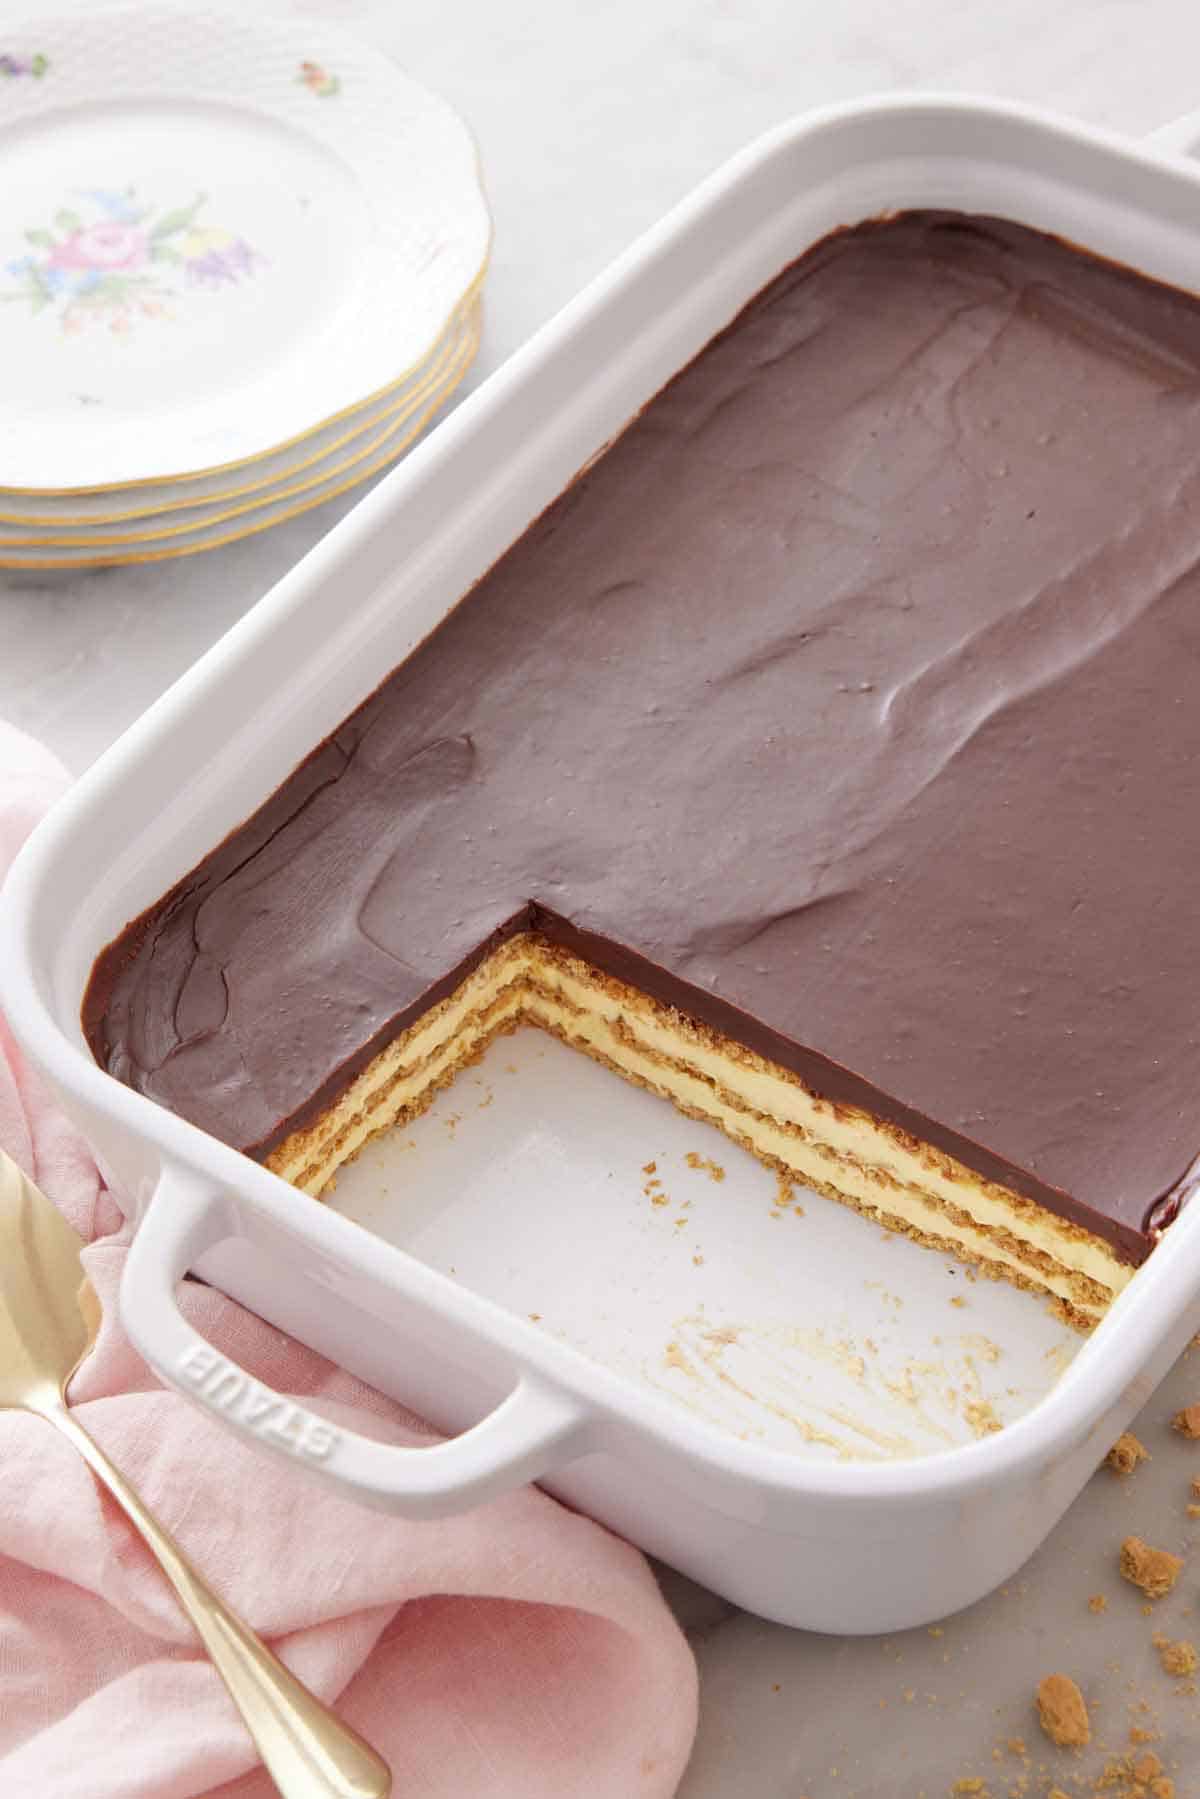 An angled view of an éclair cake in a baking dish with two slices cut out.